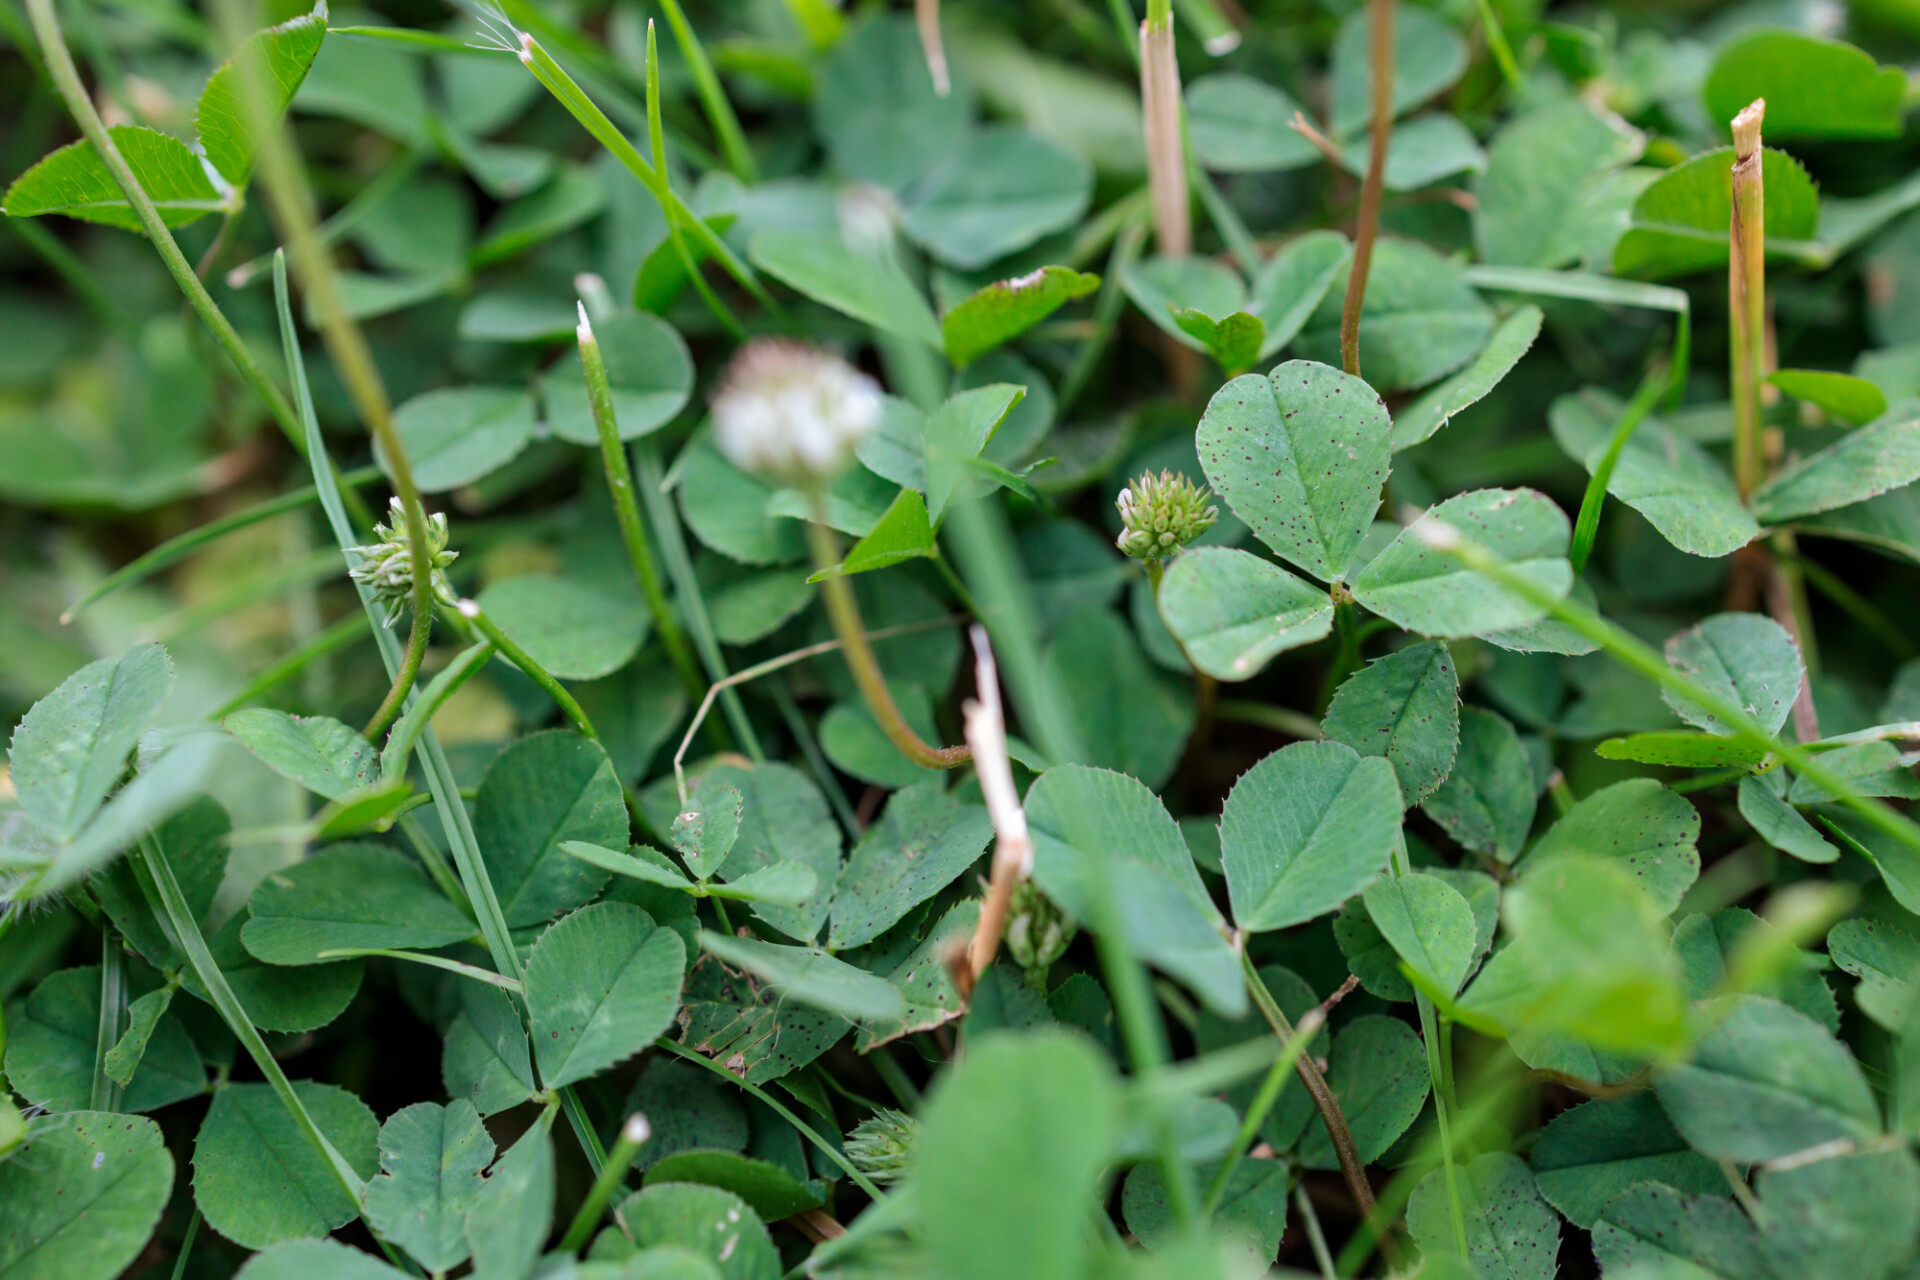 Meadow fully overgrown with clover